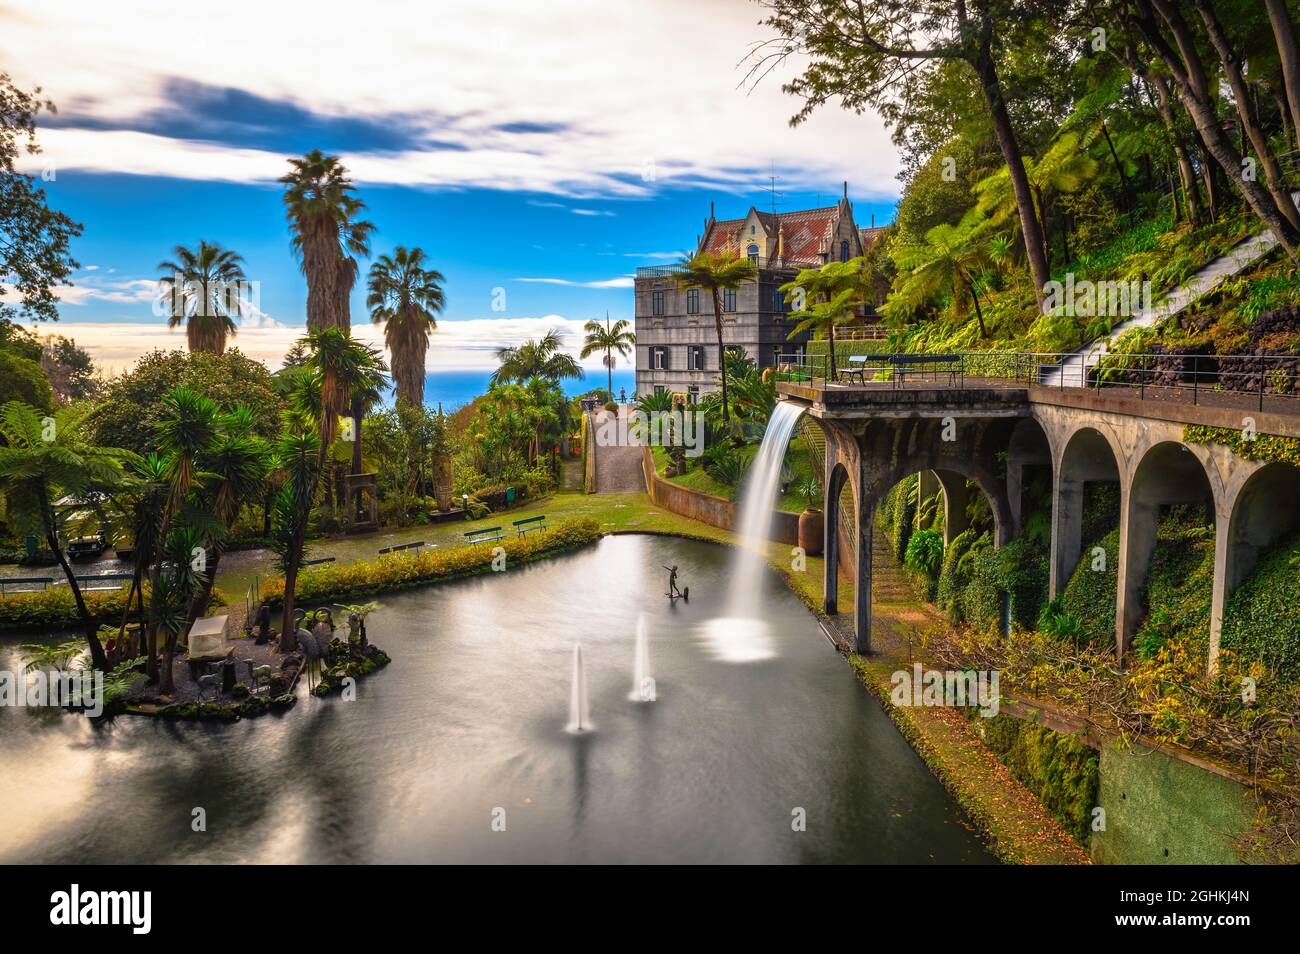 Fountain in the Monte Palace garden located in Funchal, Madeira island, Portugal Stock Photo